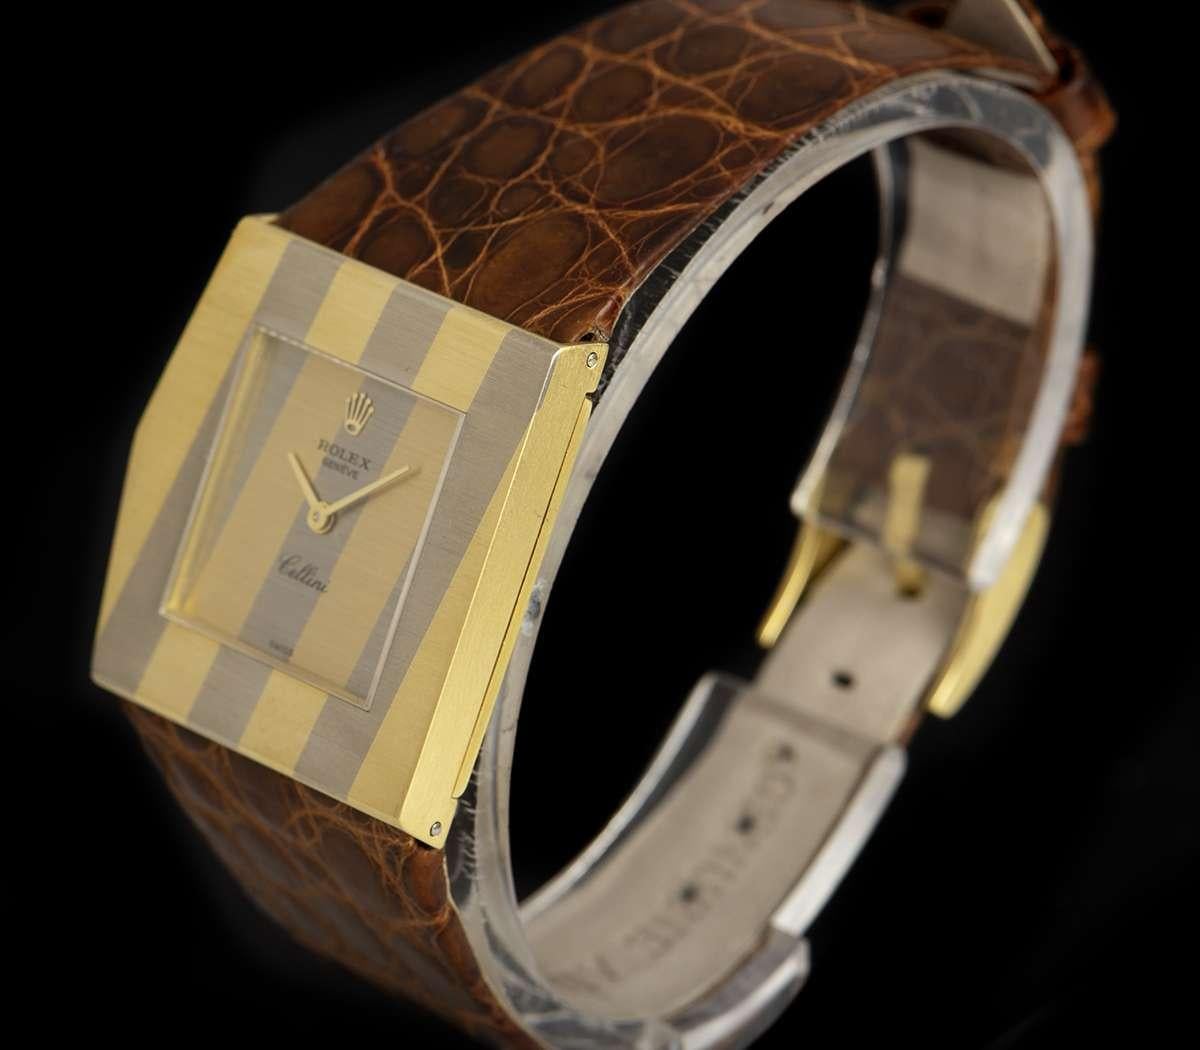 A Rare 18k Yellow Gold and 18k White Gold Striped Pentagonal King Midas Cellini Left-Handed Vintage Gents Wristwatch, yellow and white gold striped dial, a fixed 18k yellow gold and 18k white gold striped bezel, an original brown leather strap with